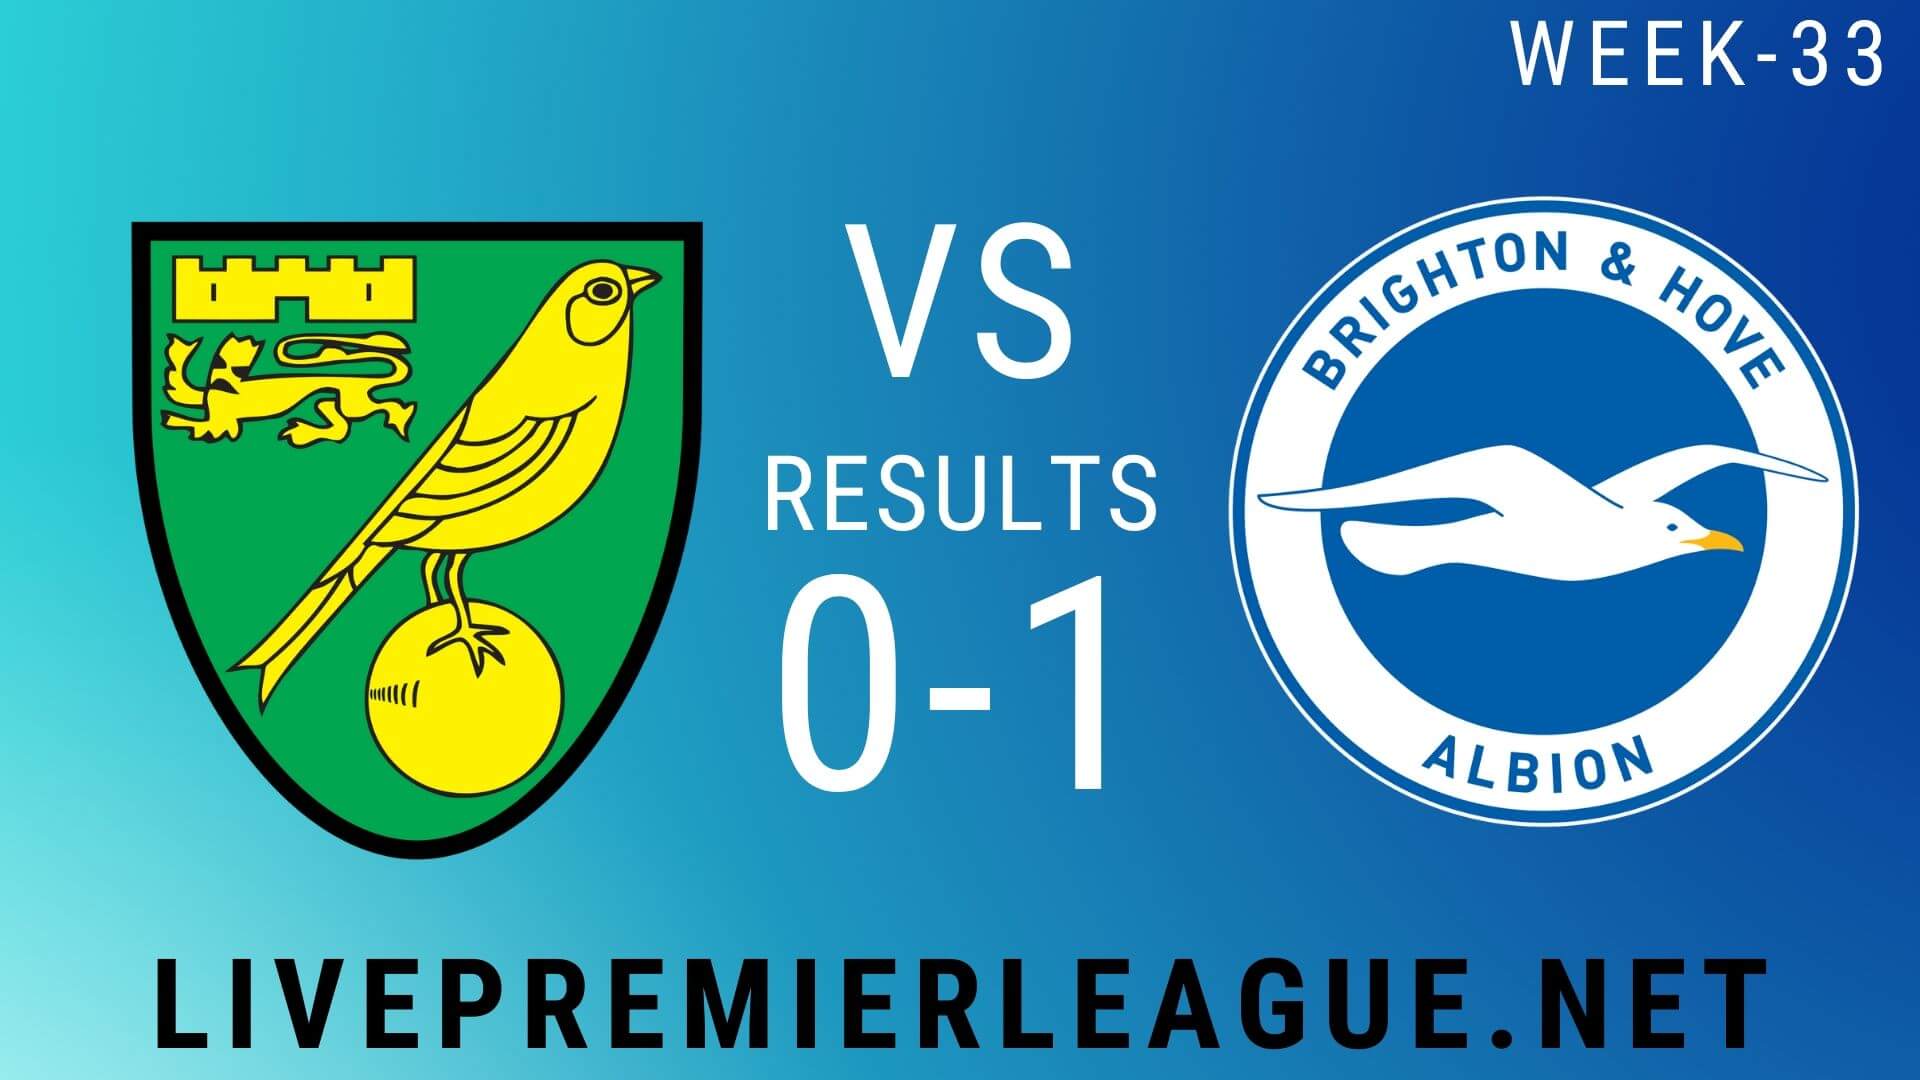 Norwich City Vs Brighton and Hove Albion | Week 33 Result 2020